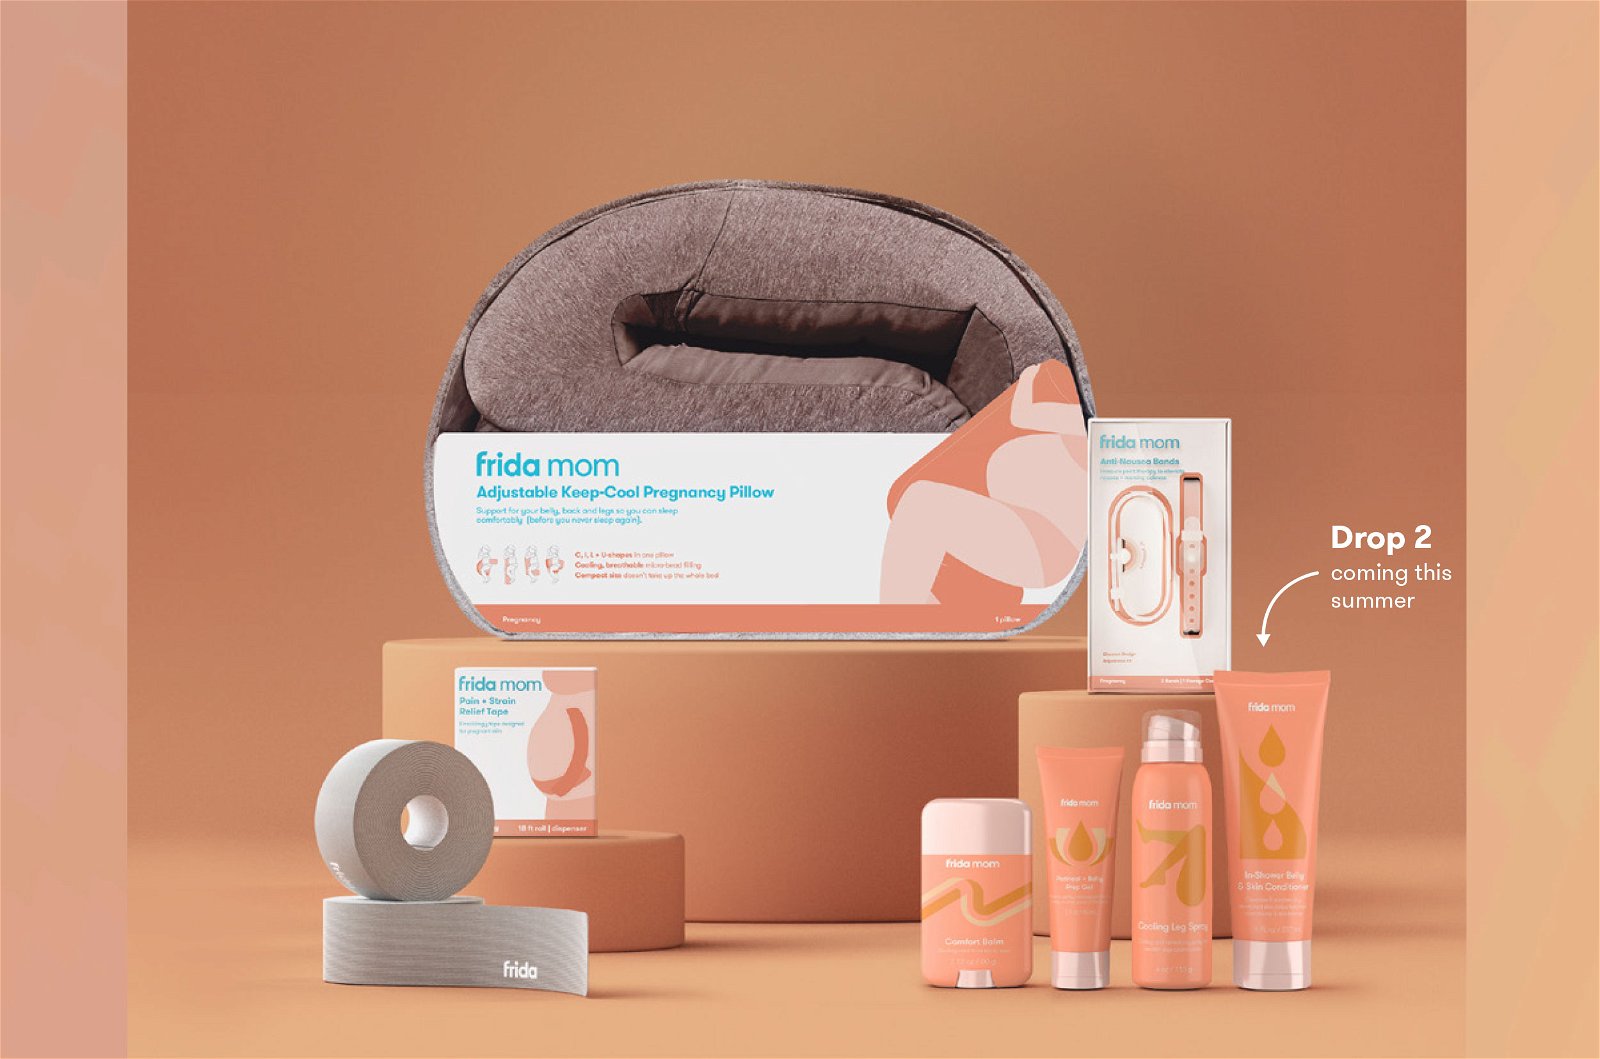 fridamom - Introducing the ultimate breast care lineup - designed